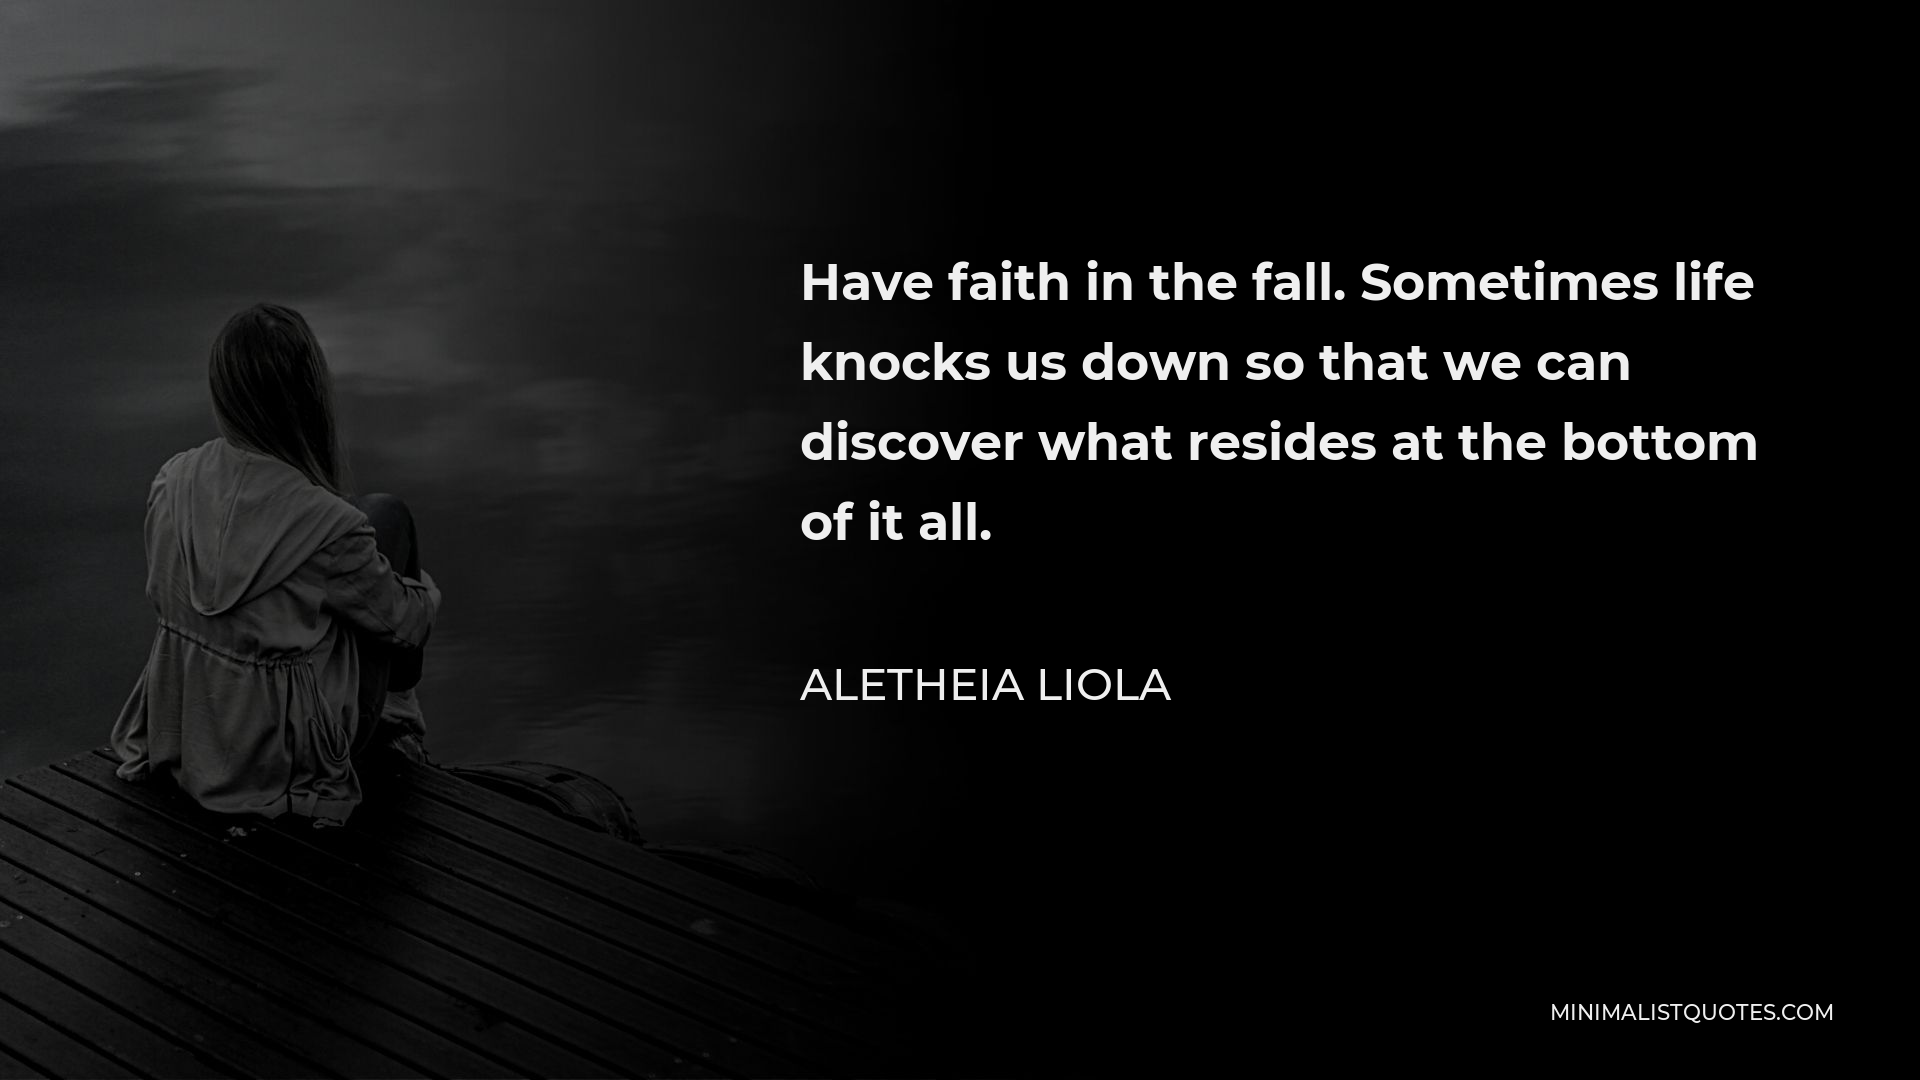 Aletheia Liola Quote - Have faith in the fall. Sometimes life knocks us down so that we can discover what resides at the bottom of it all.